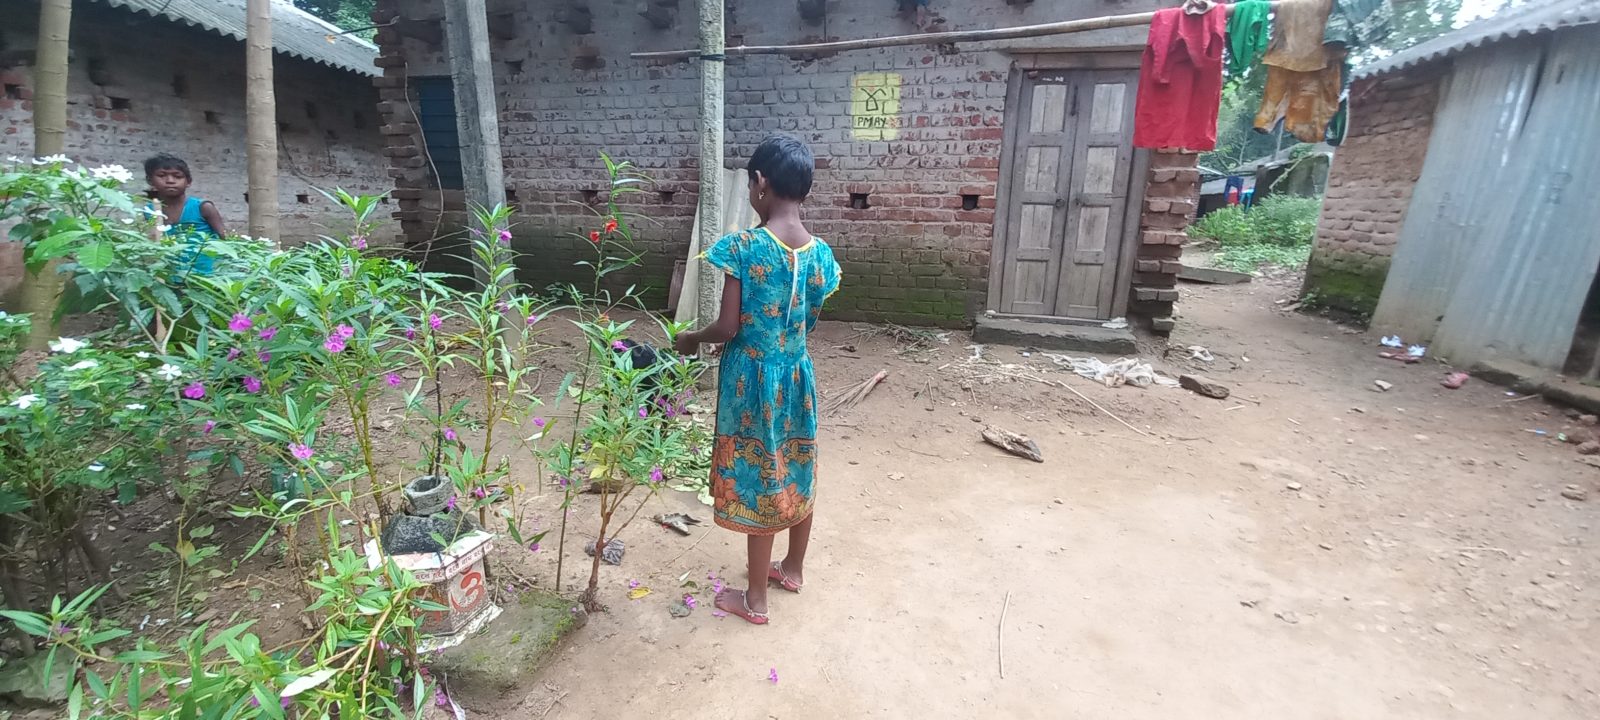 A young girl stands next to plants picking them.